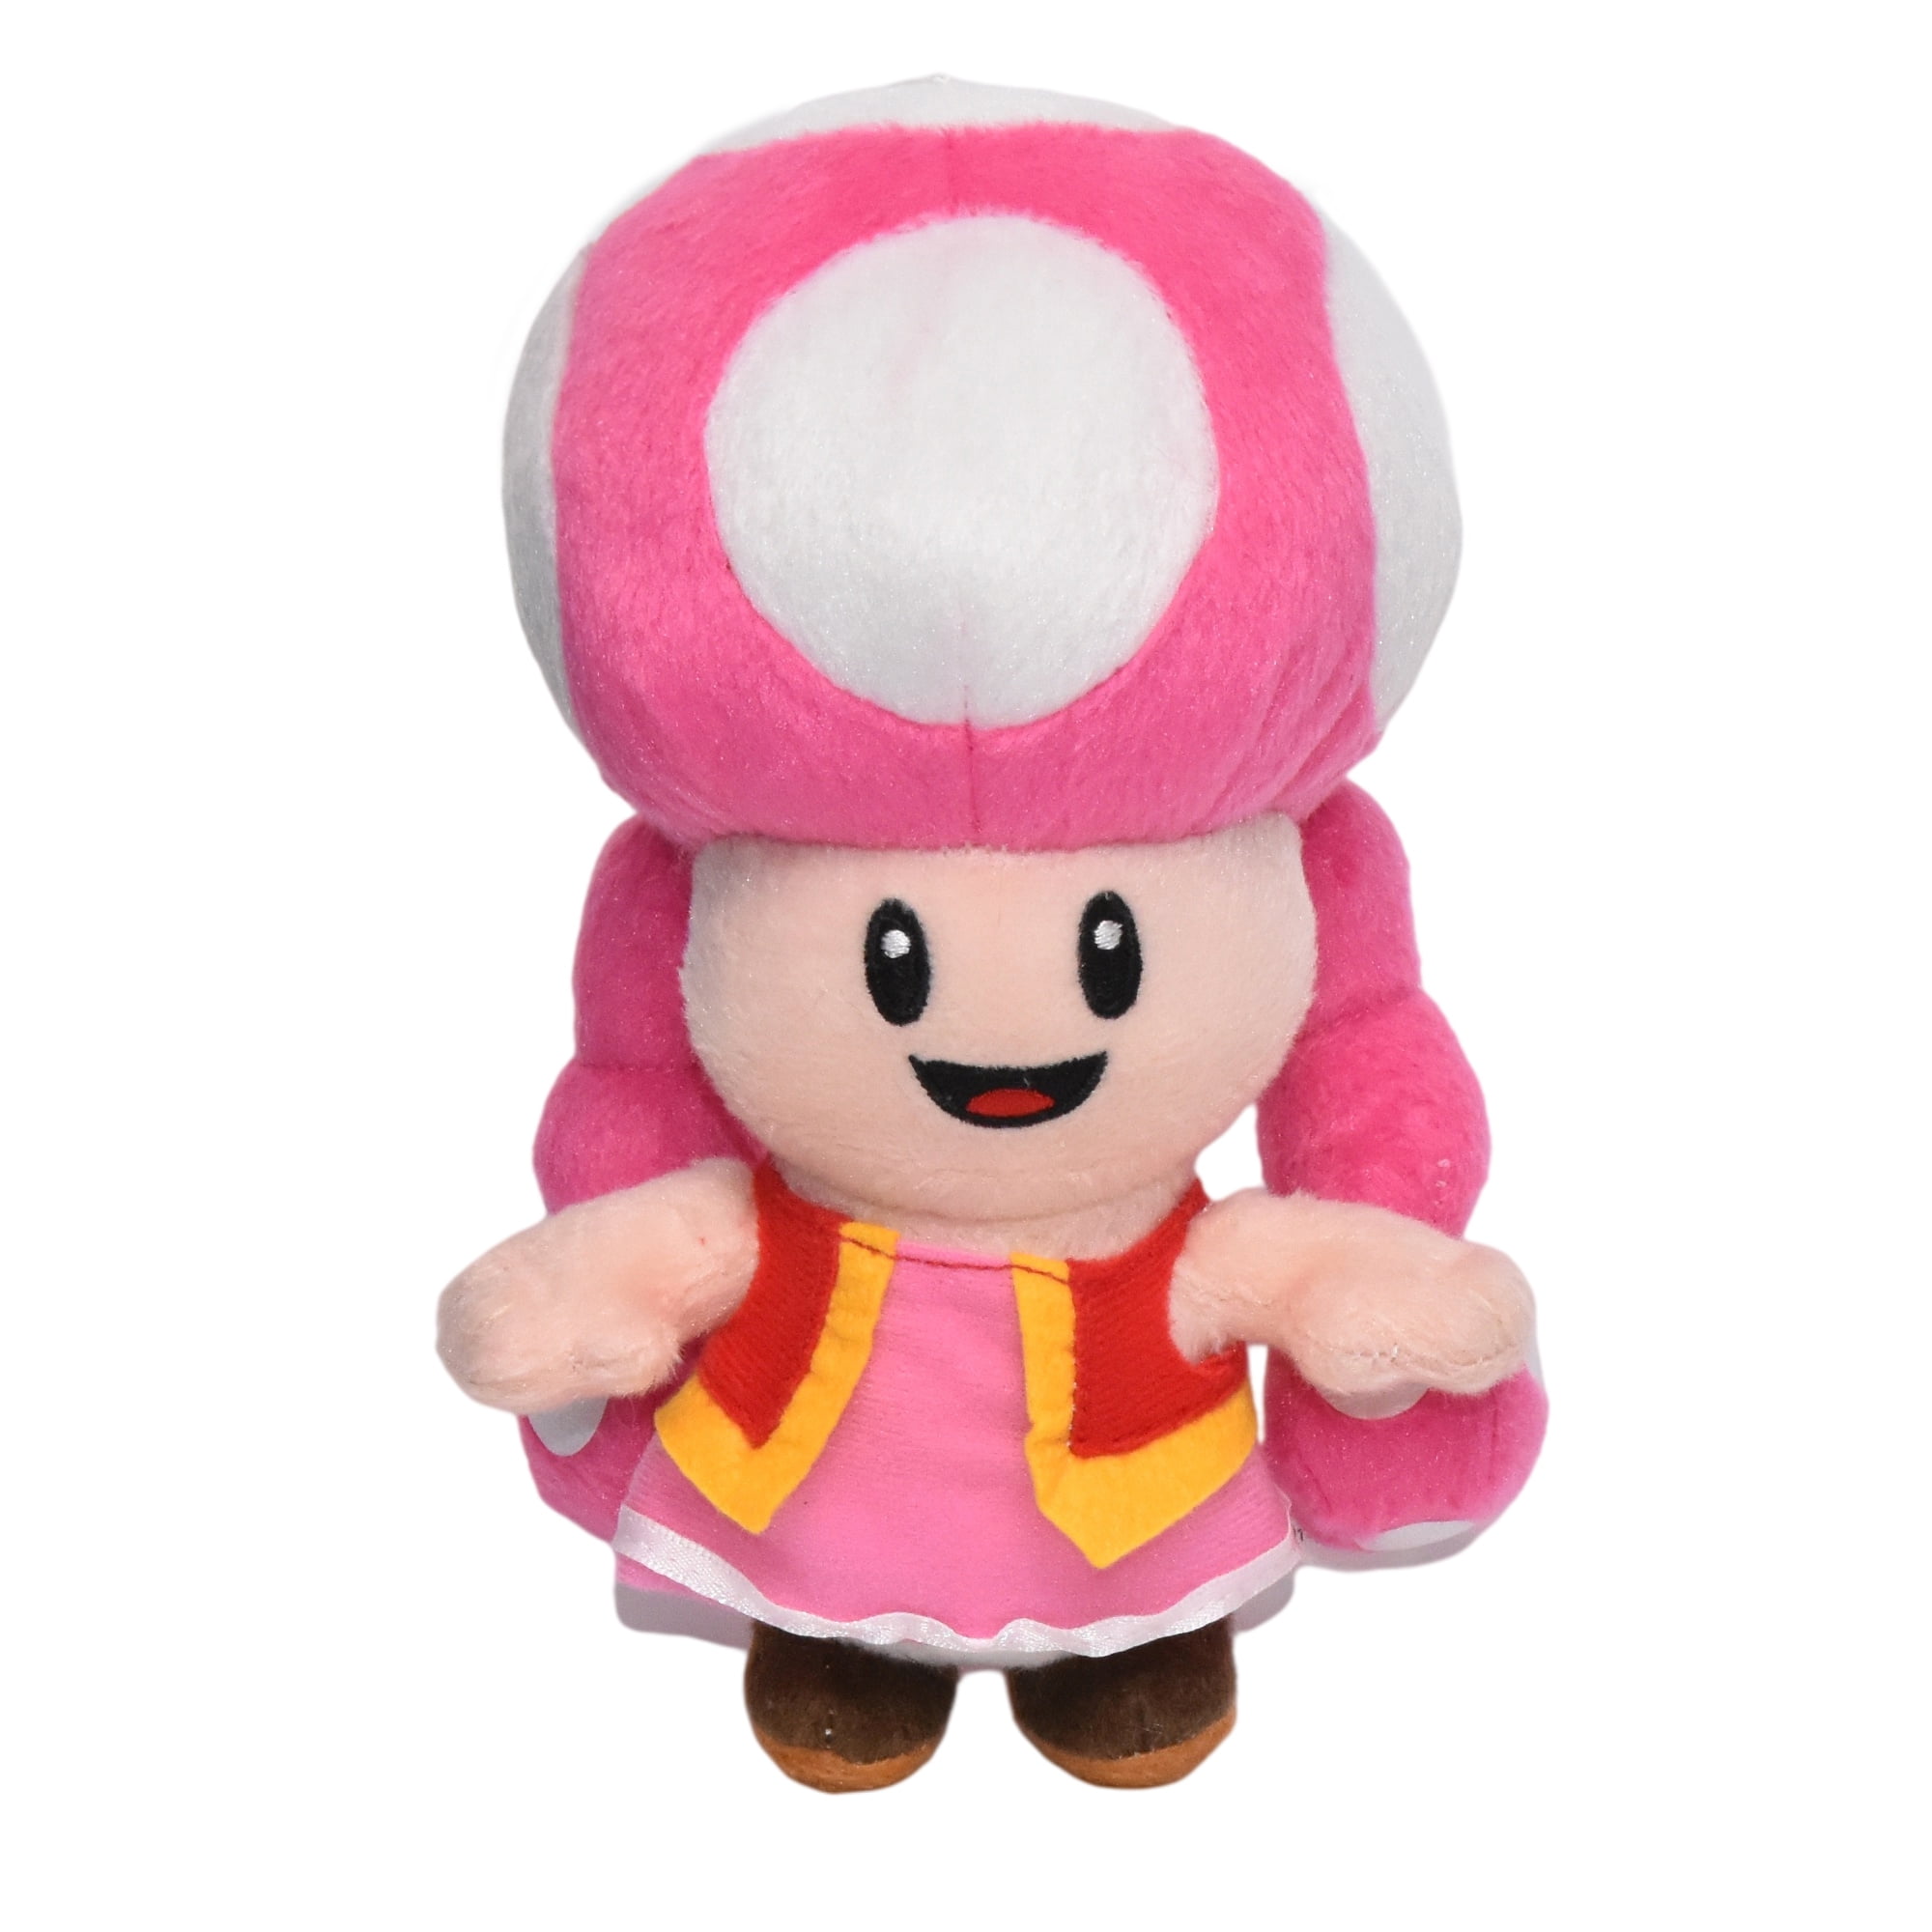 Details about   Toadette 7inch Super Mario Bros Soft Plush Toy Game Collectible Doll Xmas Gifts 